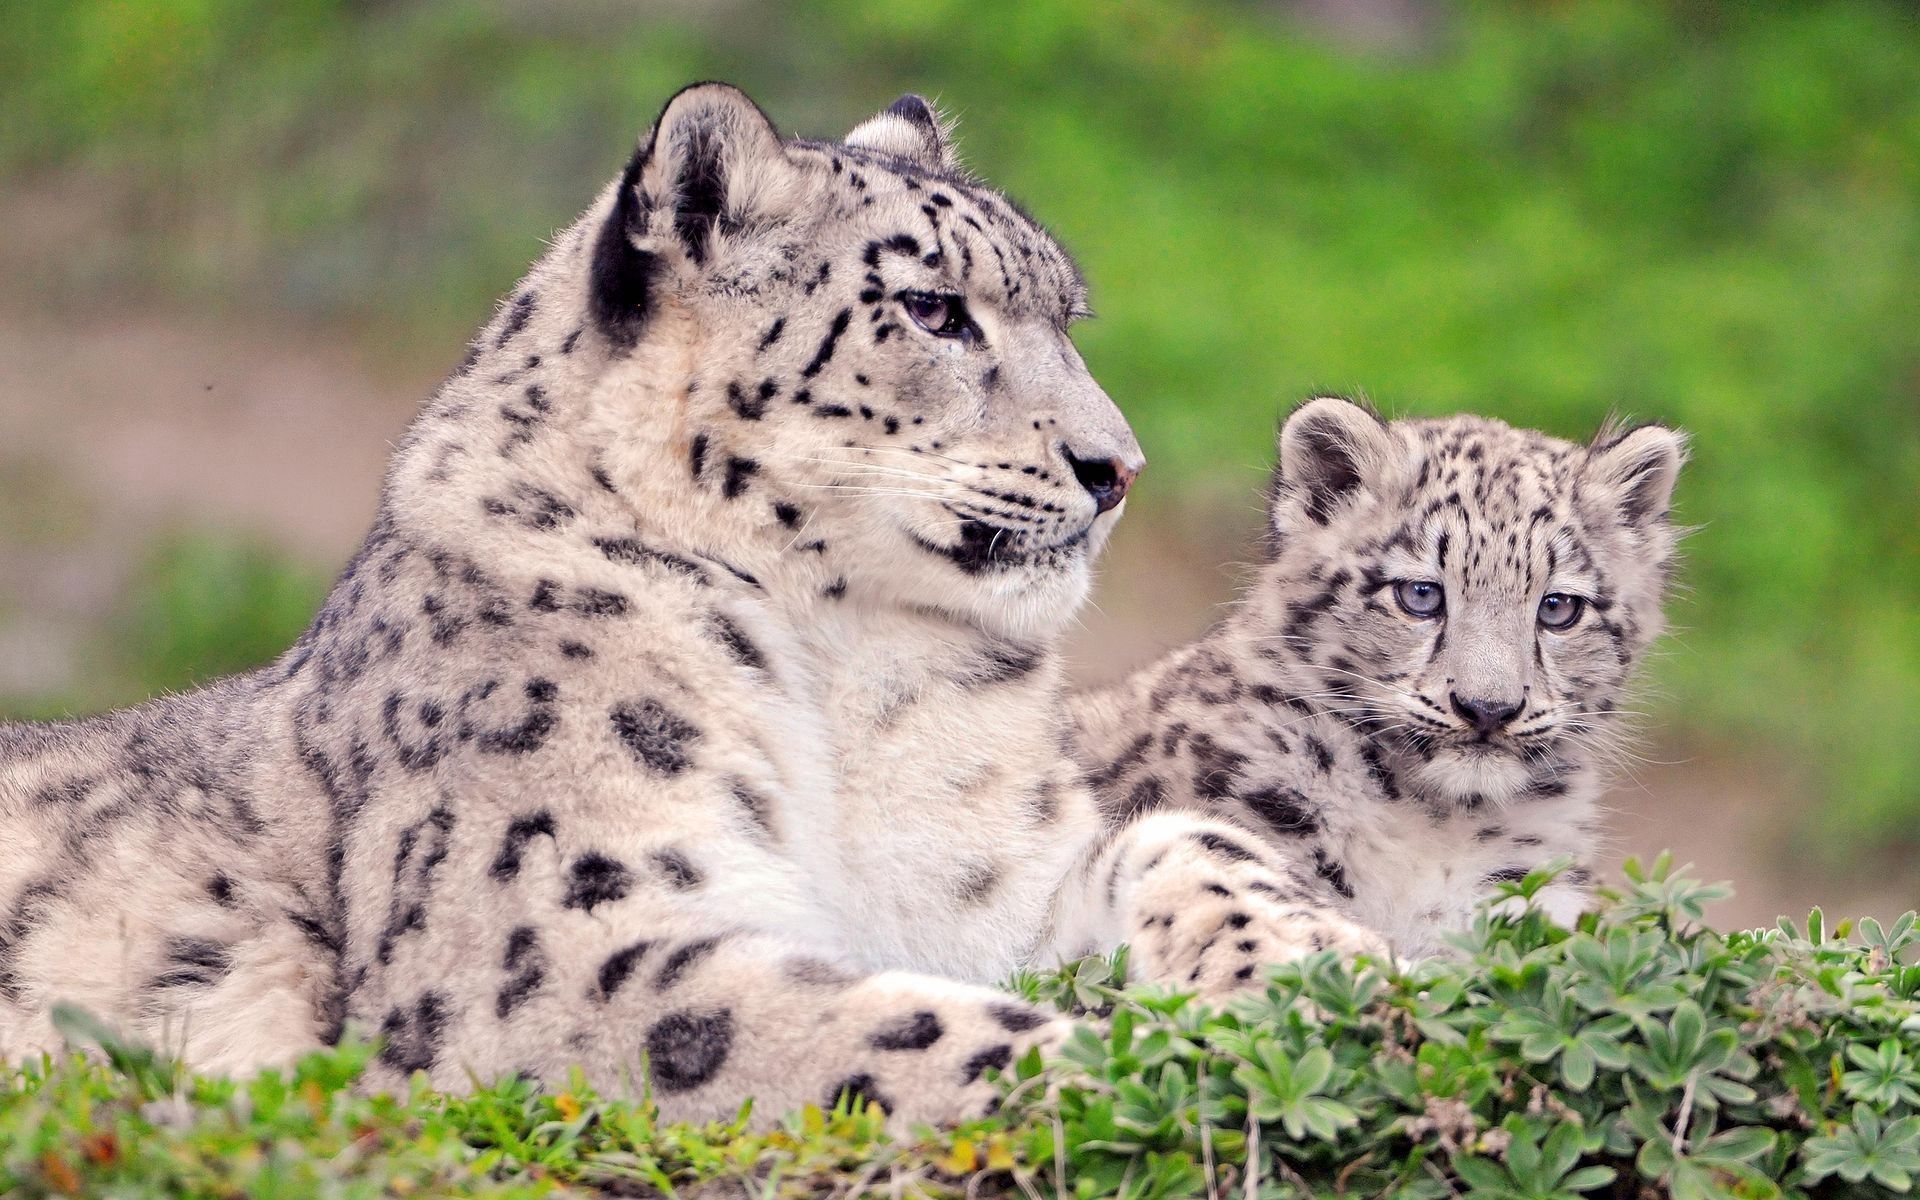 couple, animals, grass, snow leopard, sit, young, pair, joey cellphone